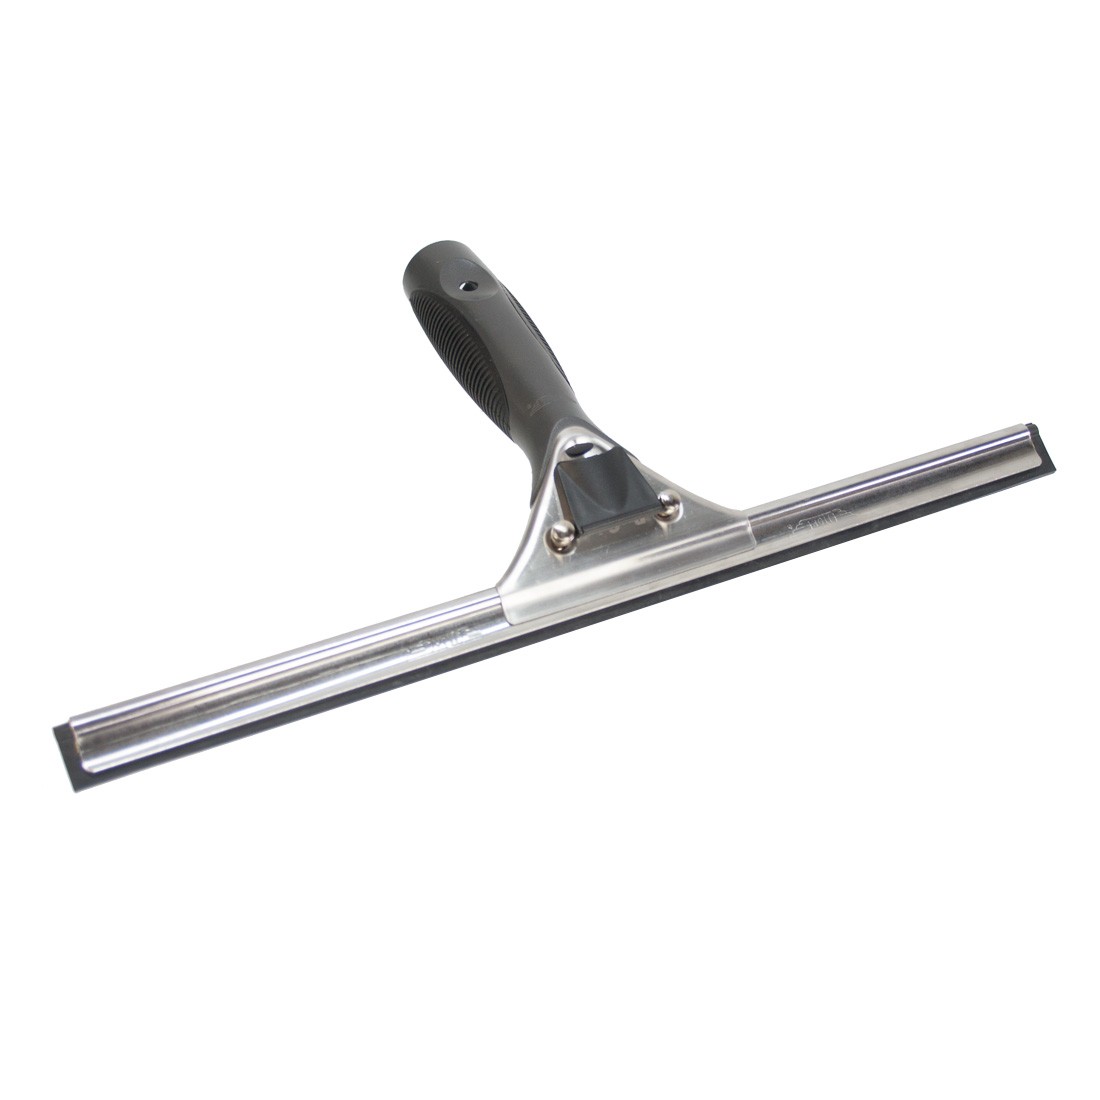 Complete Squeegee w/ Fixed Handle & Quicksilver Channel - 14